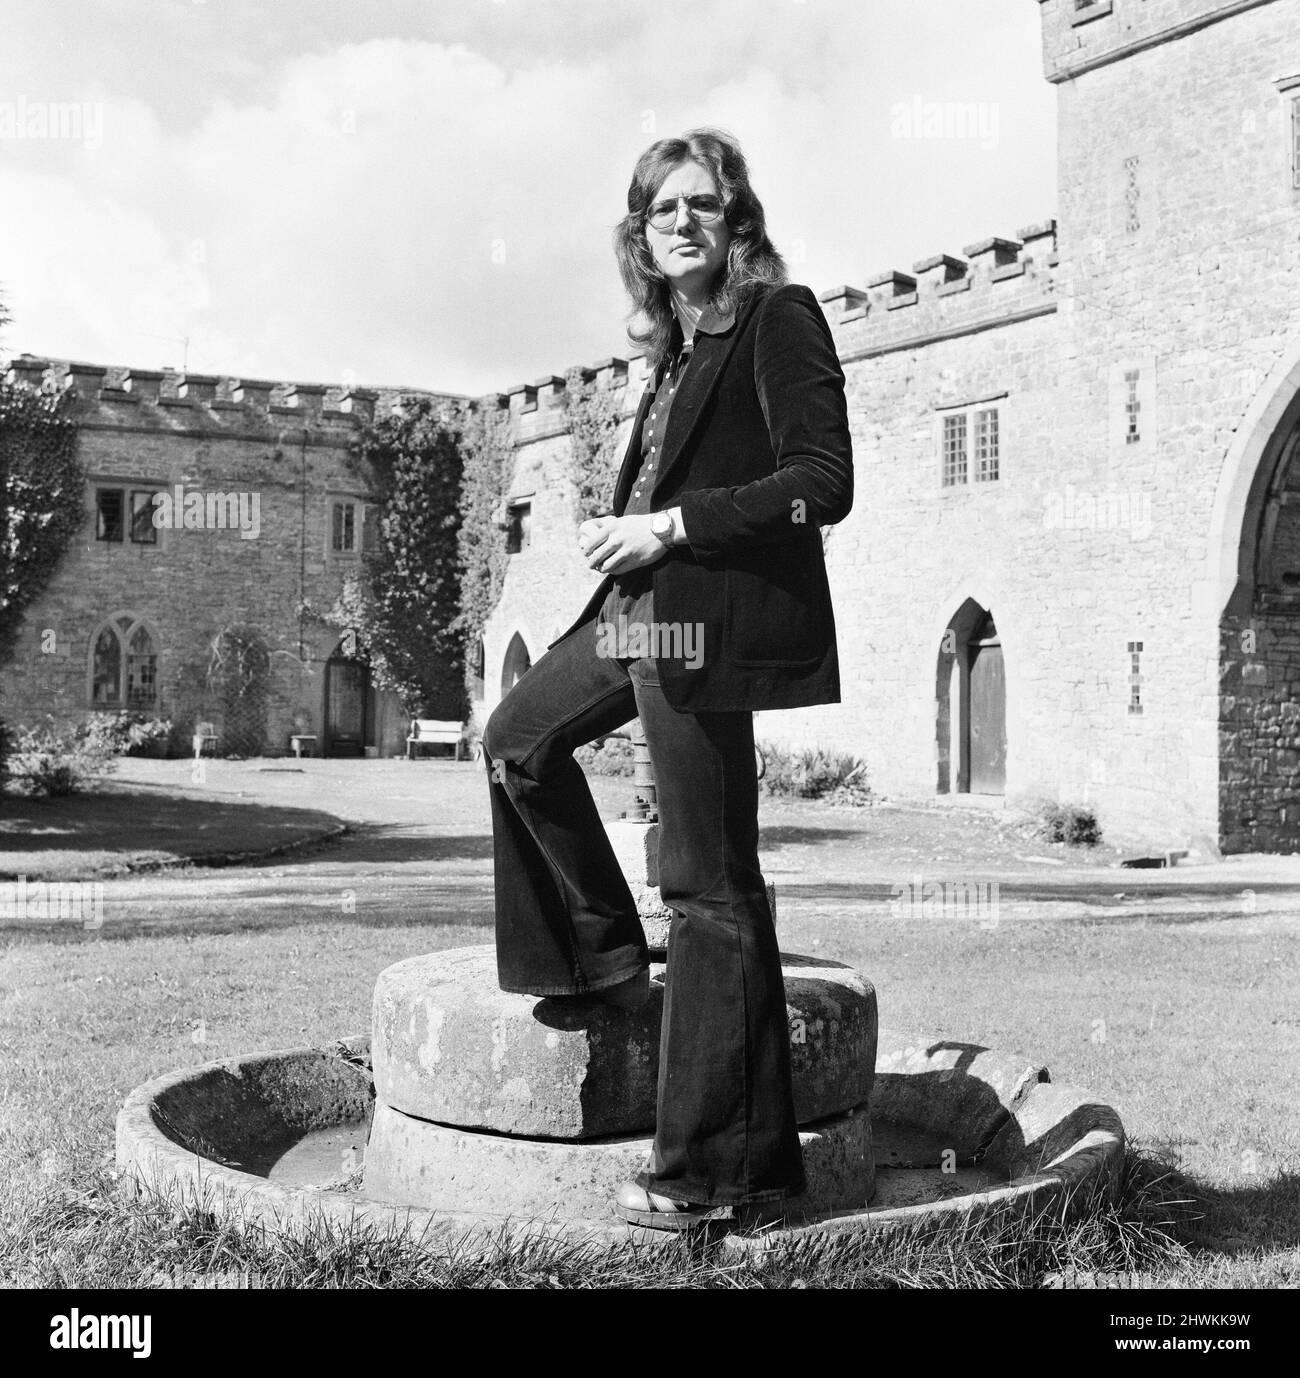 The Deep Purple rock group, pictured with their new lead singer David Coverdale who replaced Ian Gillan.David Coverdale pictured outside Clearwell Castle. 23rd September 1973. Stock Photo